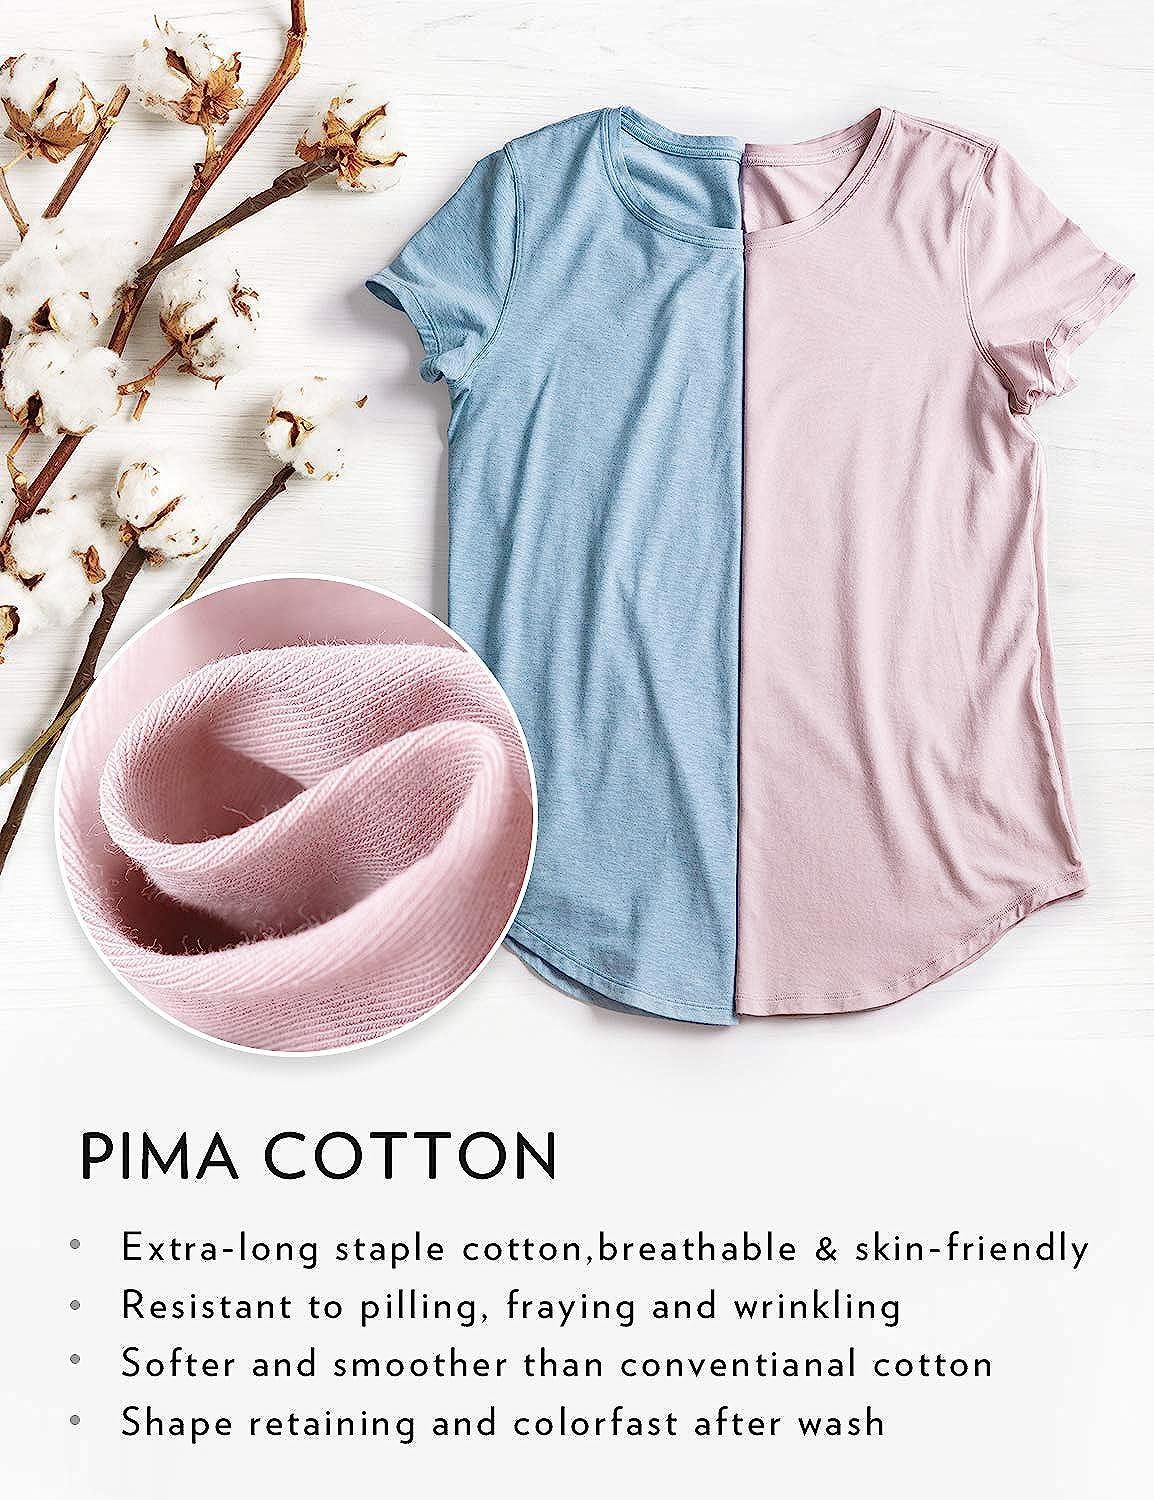  CRZ YOGA Women's Pima Cotton Short Sleeve Workout Shirt Yoga T- Shirt Athletic Tee Top Berry Heather XX-Small : Clothing, Shoes & Jewelry